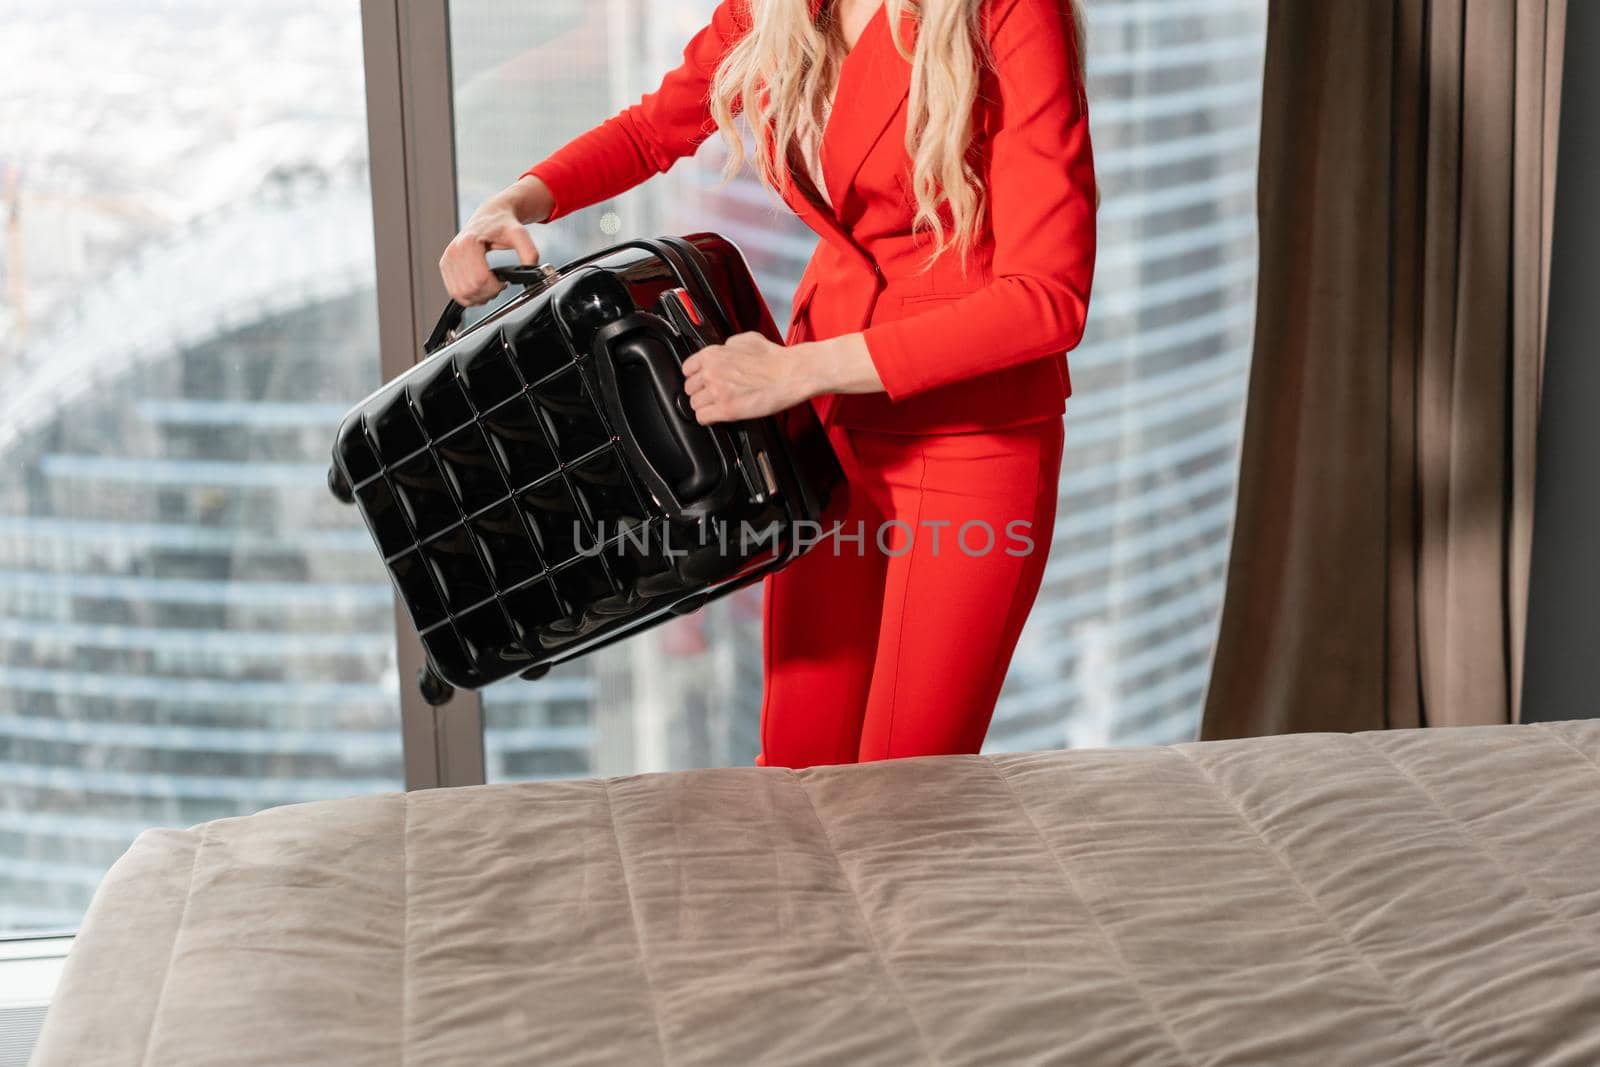 Stewardess in red uniform arrives in a hotel room with black suitcase. Rest in the transit city before the return flight. Young blond Woman in red coral suit unpacks suitcase